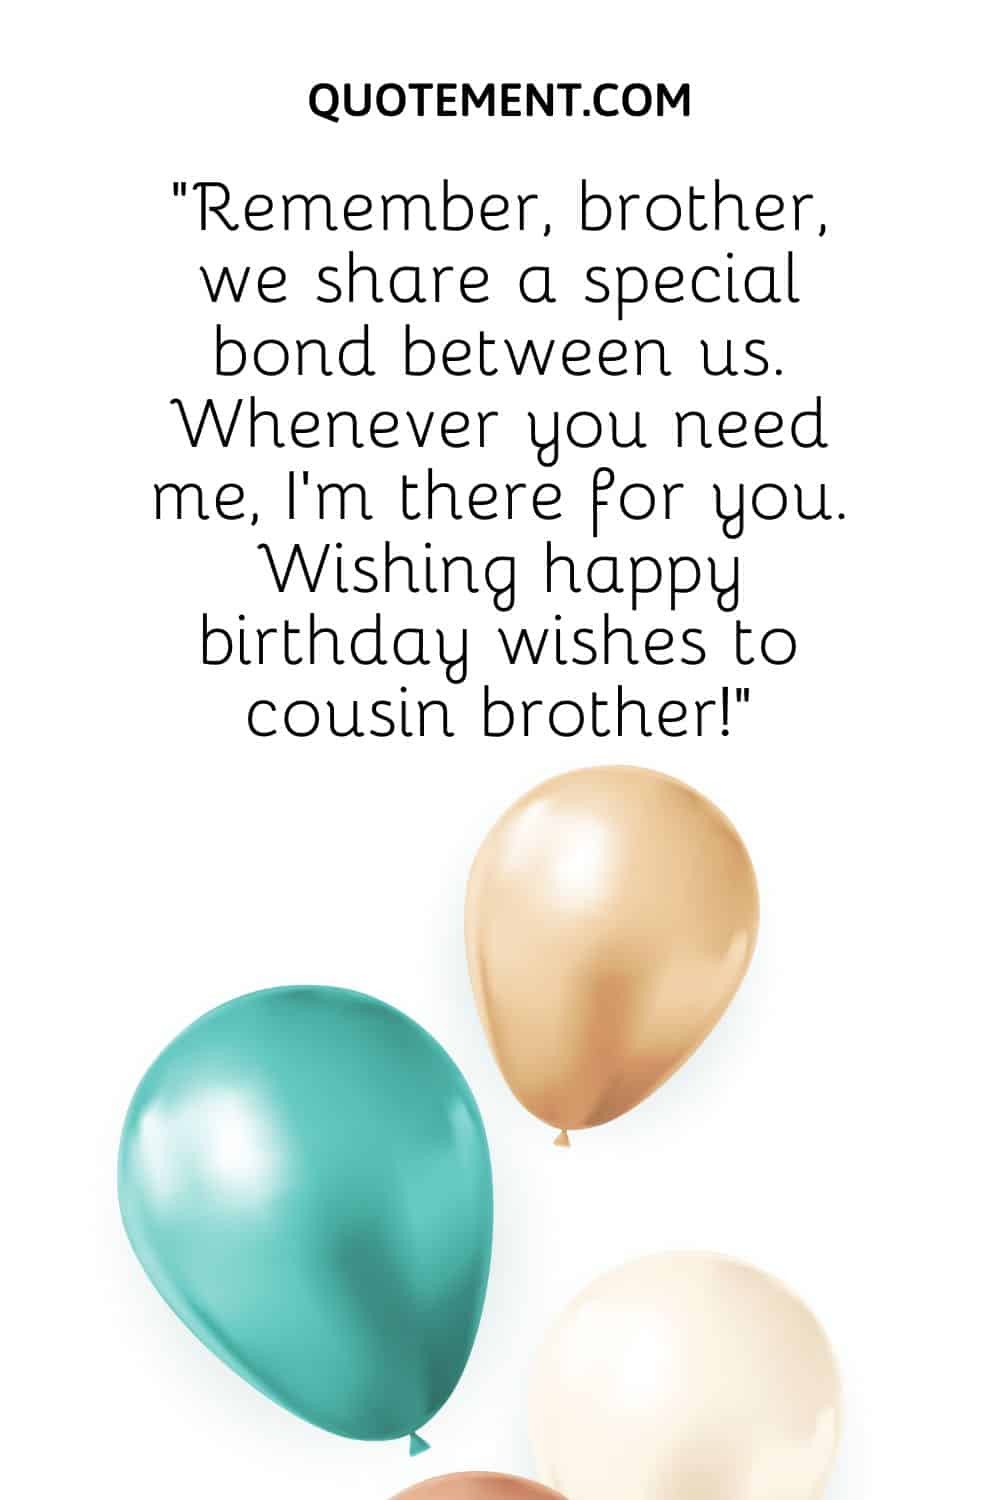 110 Heartwarming Happy Birthday Wishes For Cousin Brother